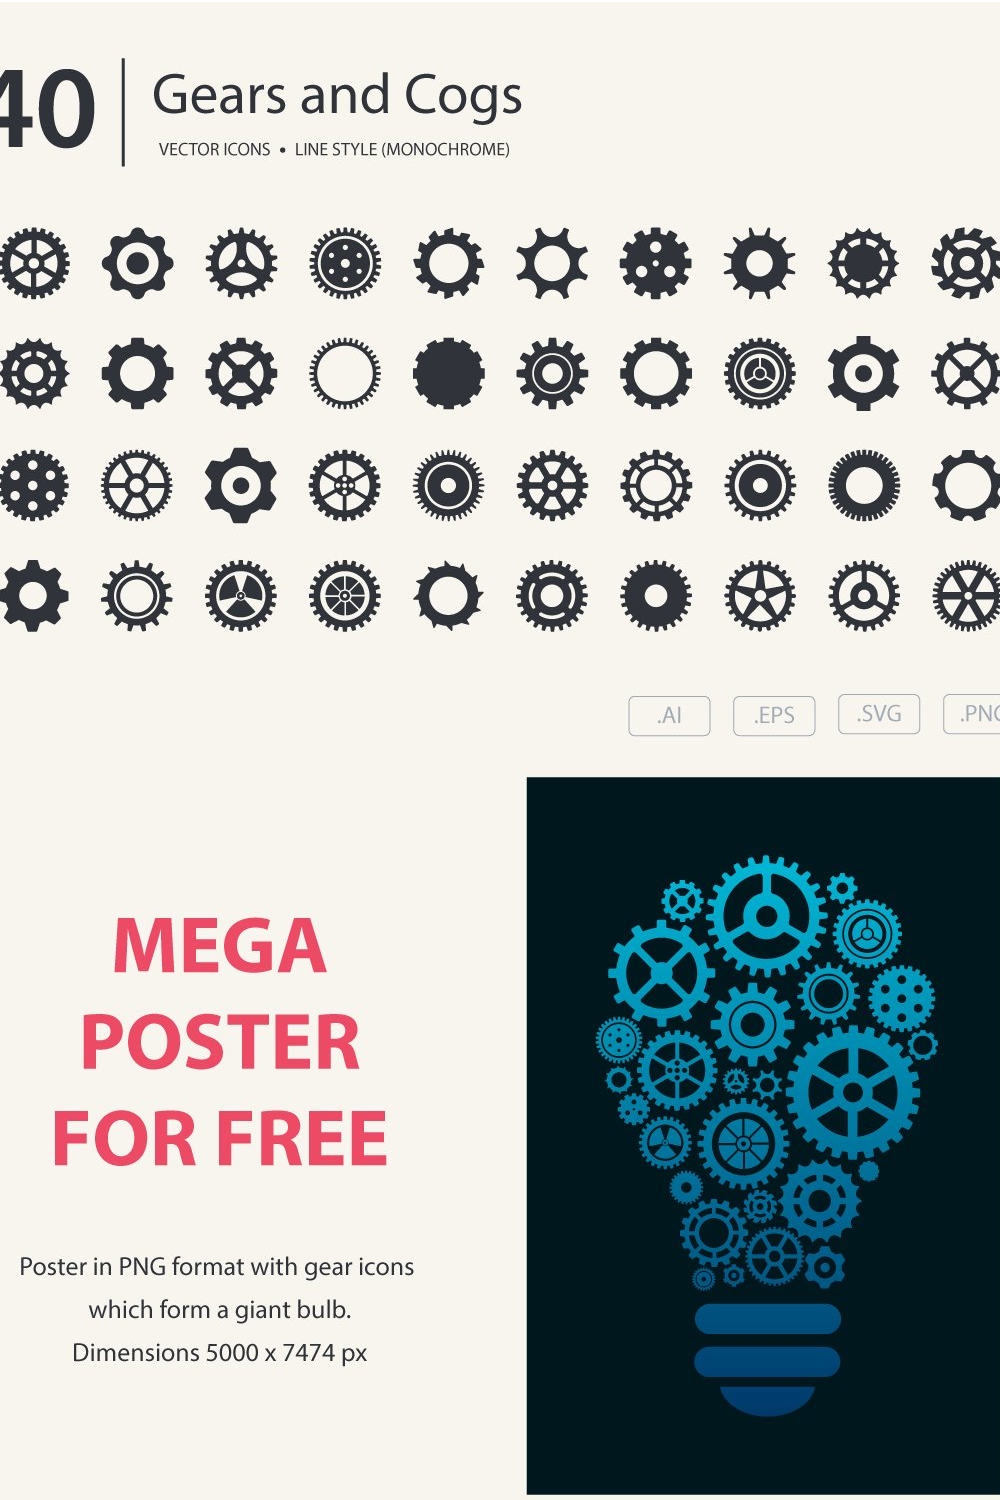 Illustrations gears and cogs icon set of pinterest.